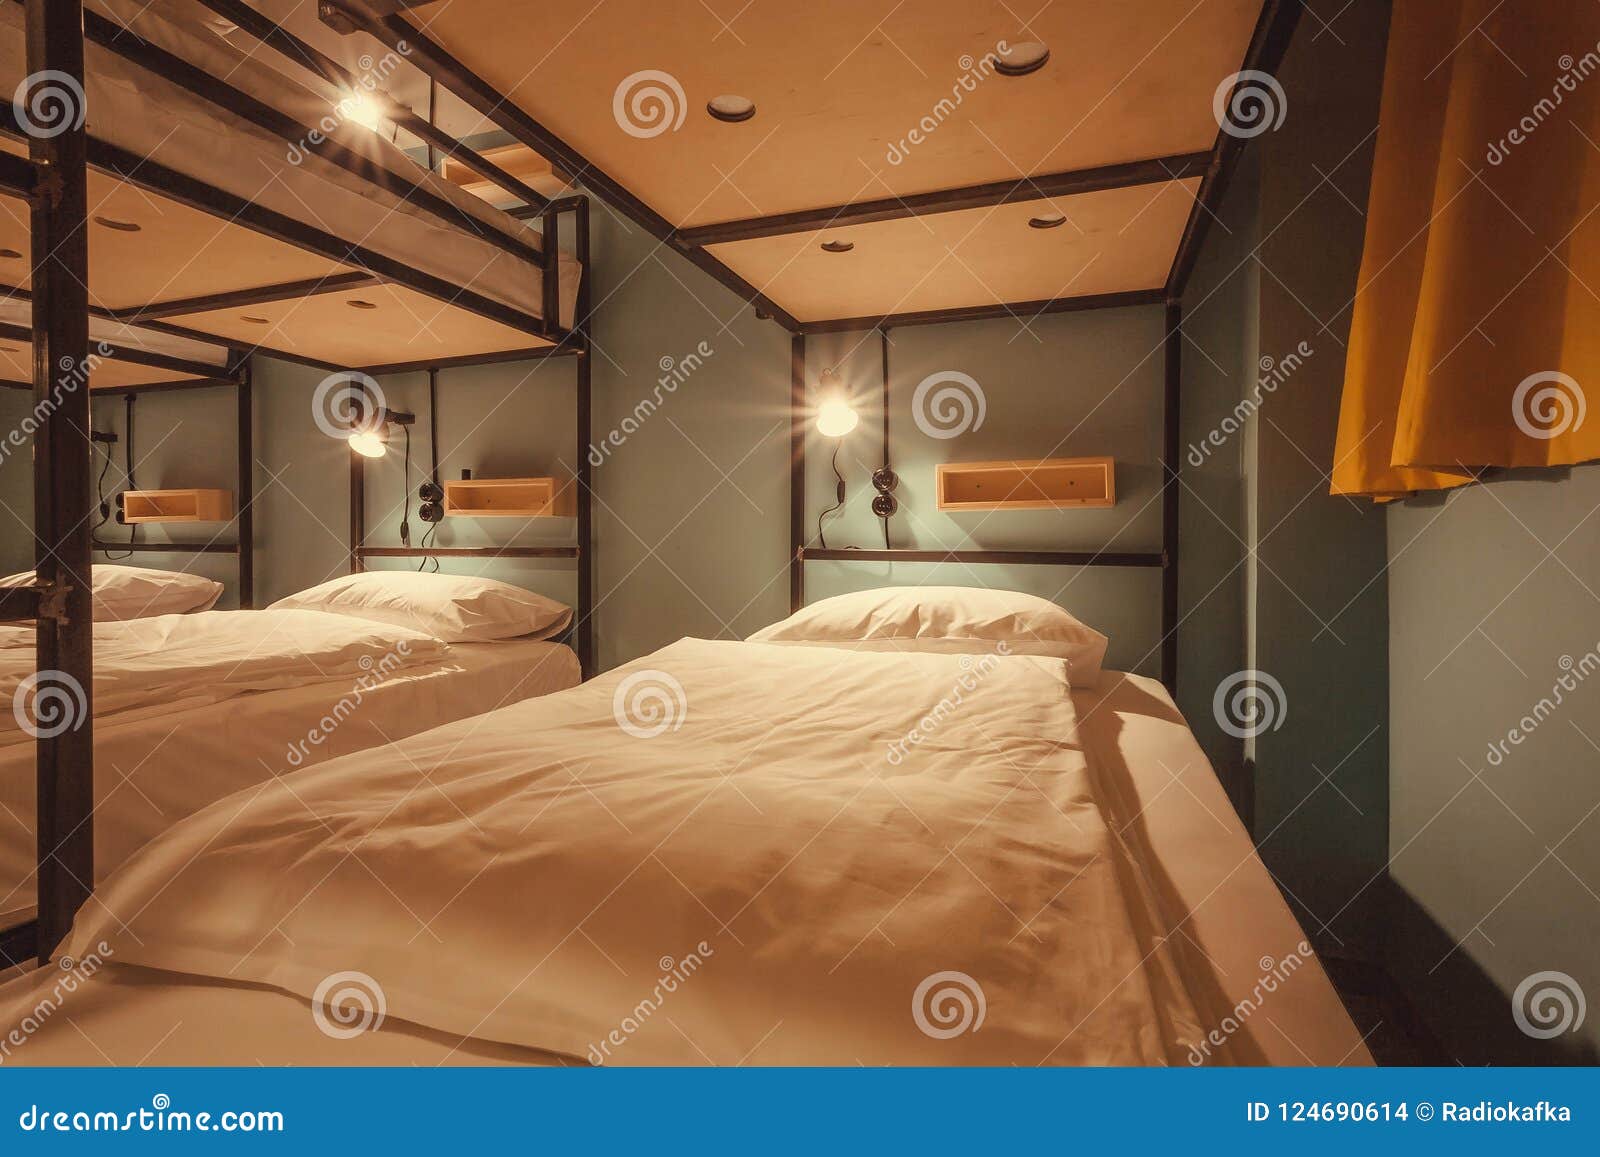 interior  of a dorm room of tourist hostel with clean beds for twelve people